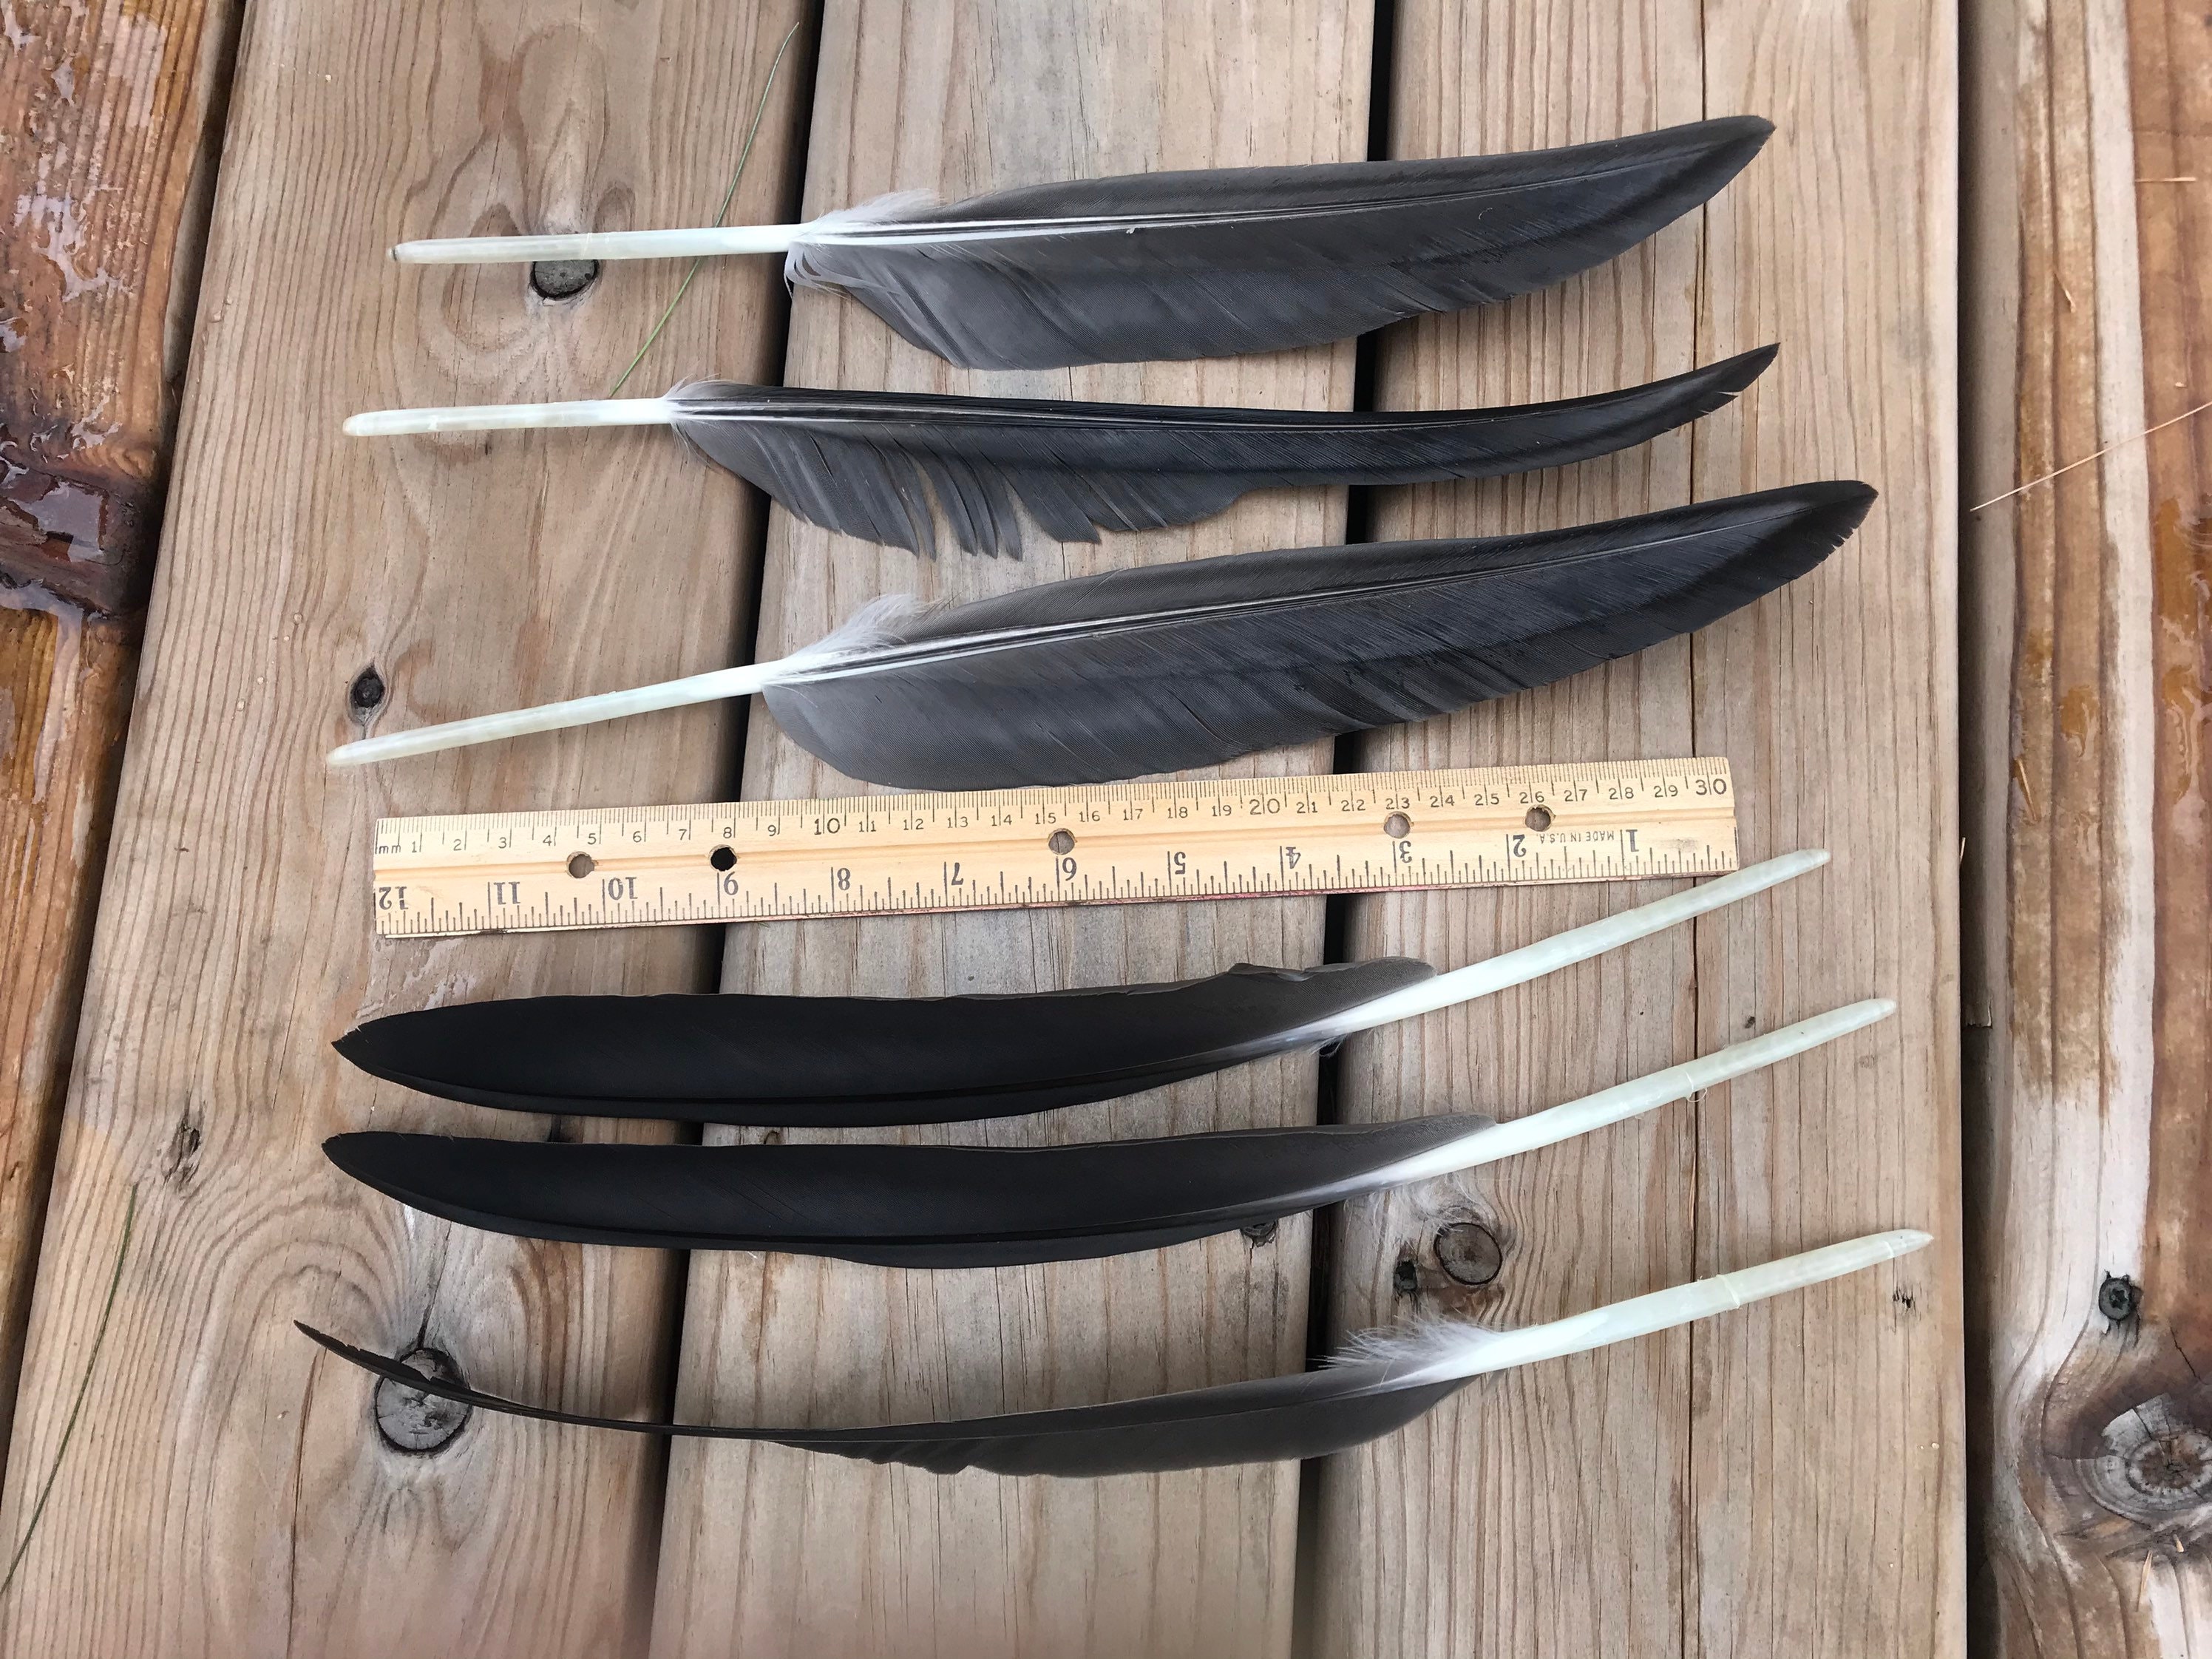 50 Black Feathers 6-7 Inch, Black Quills, Real Feathers, Black Bird  Feathers, Natural Feathers, Black Craft Feathers 